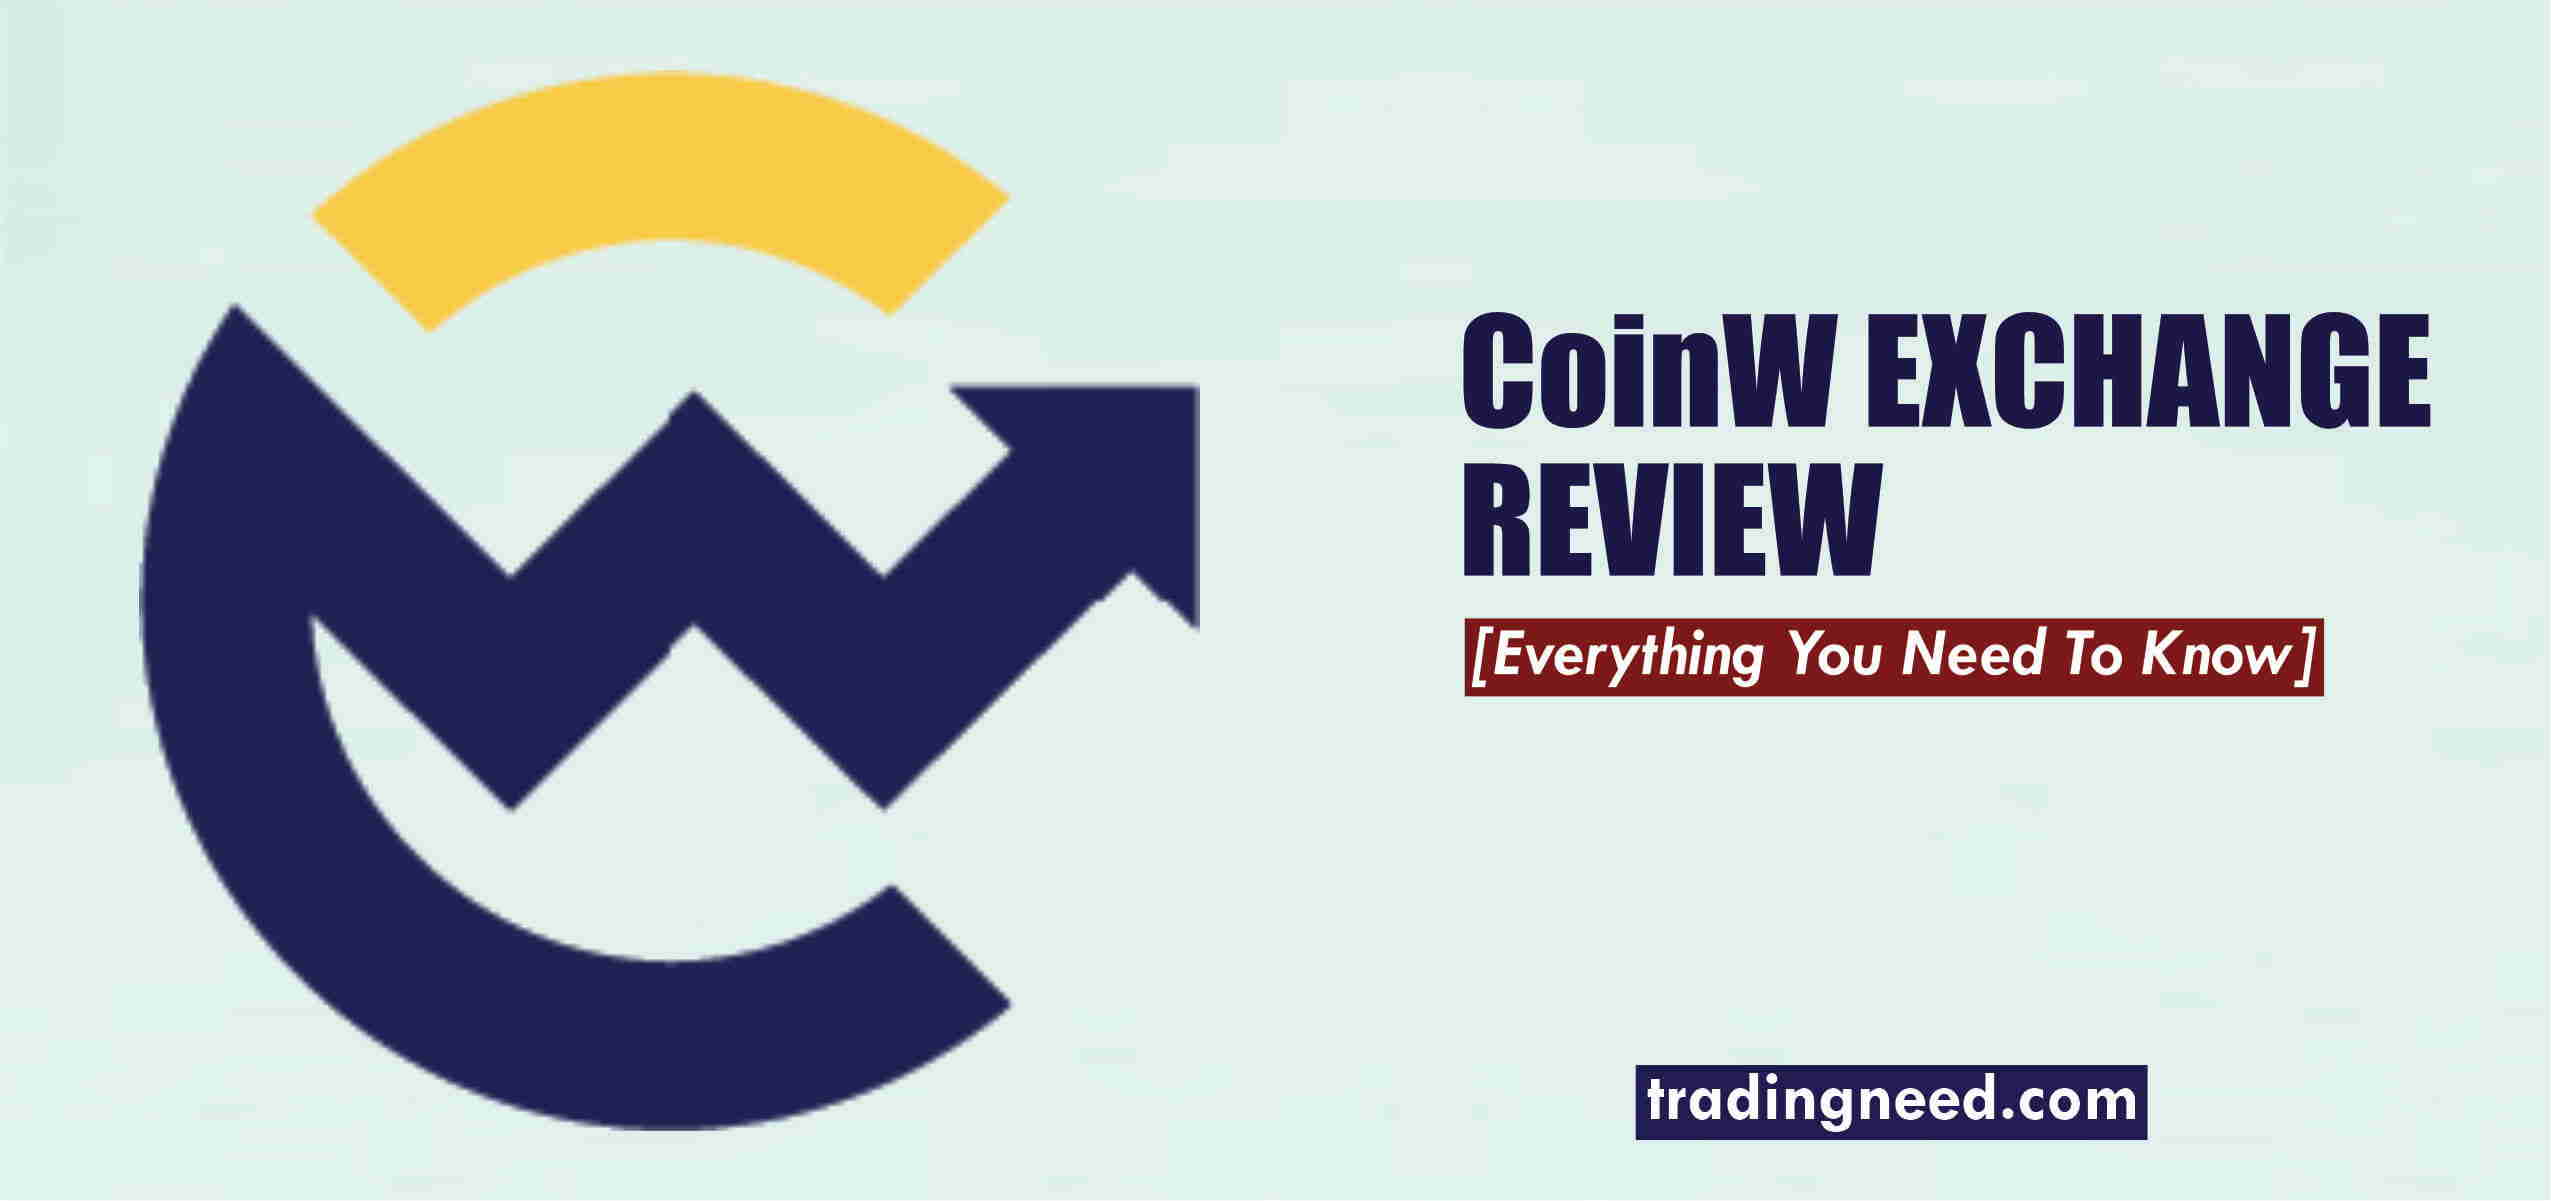 CoinW exchange review